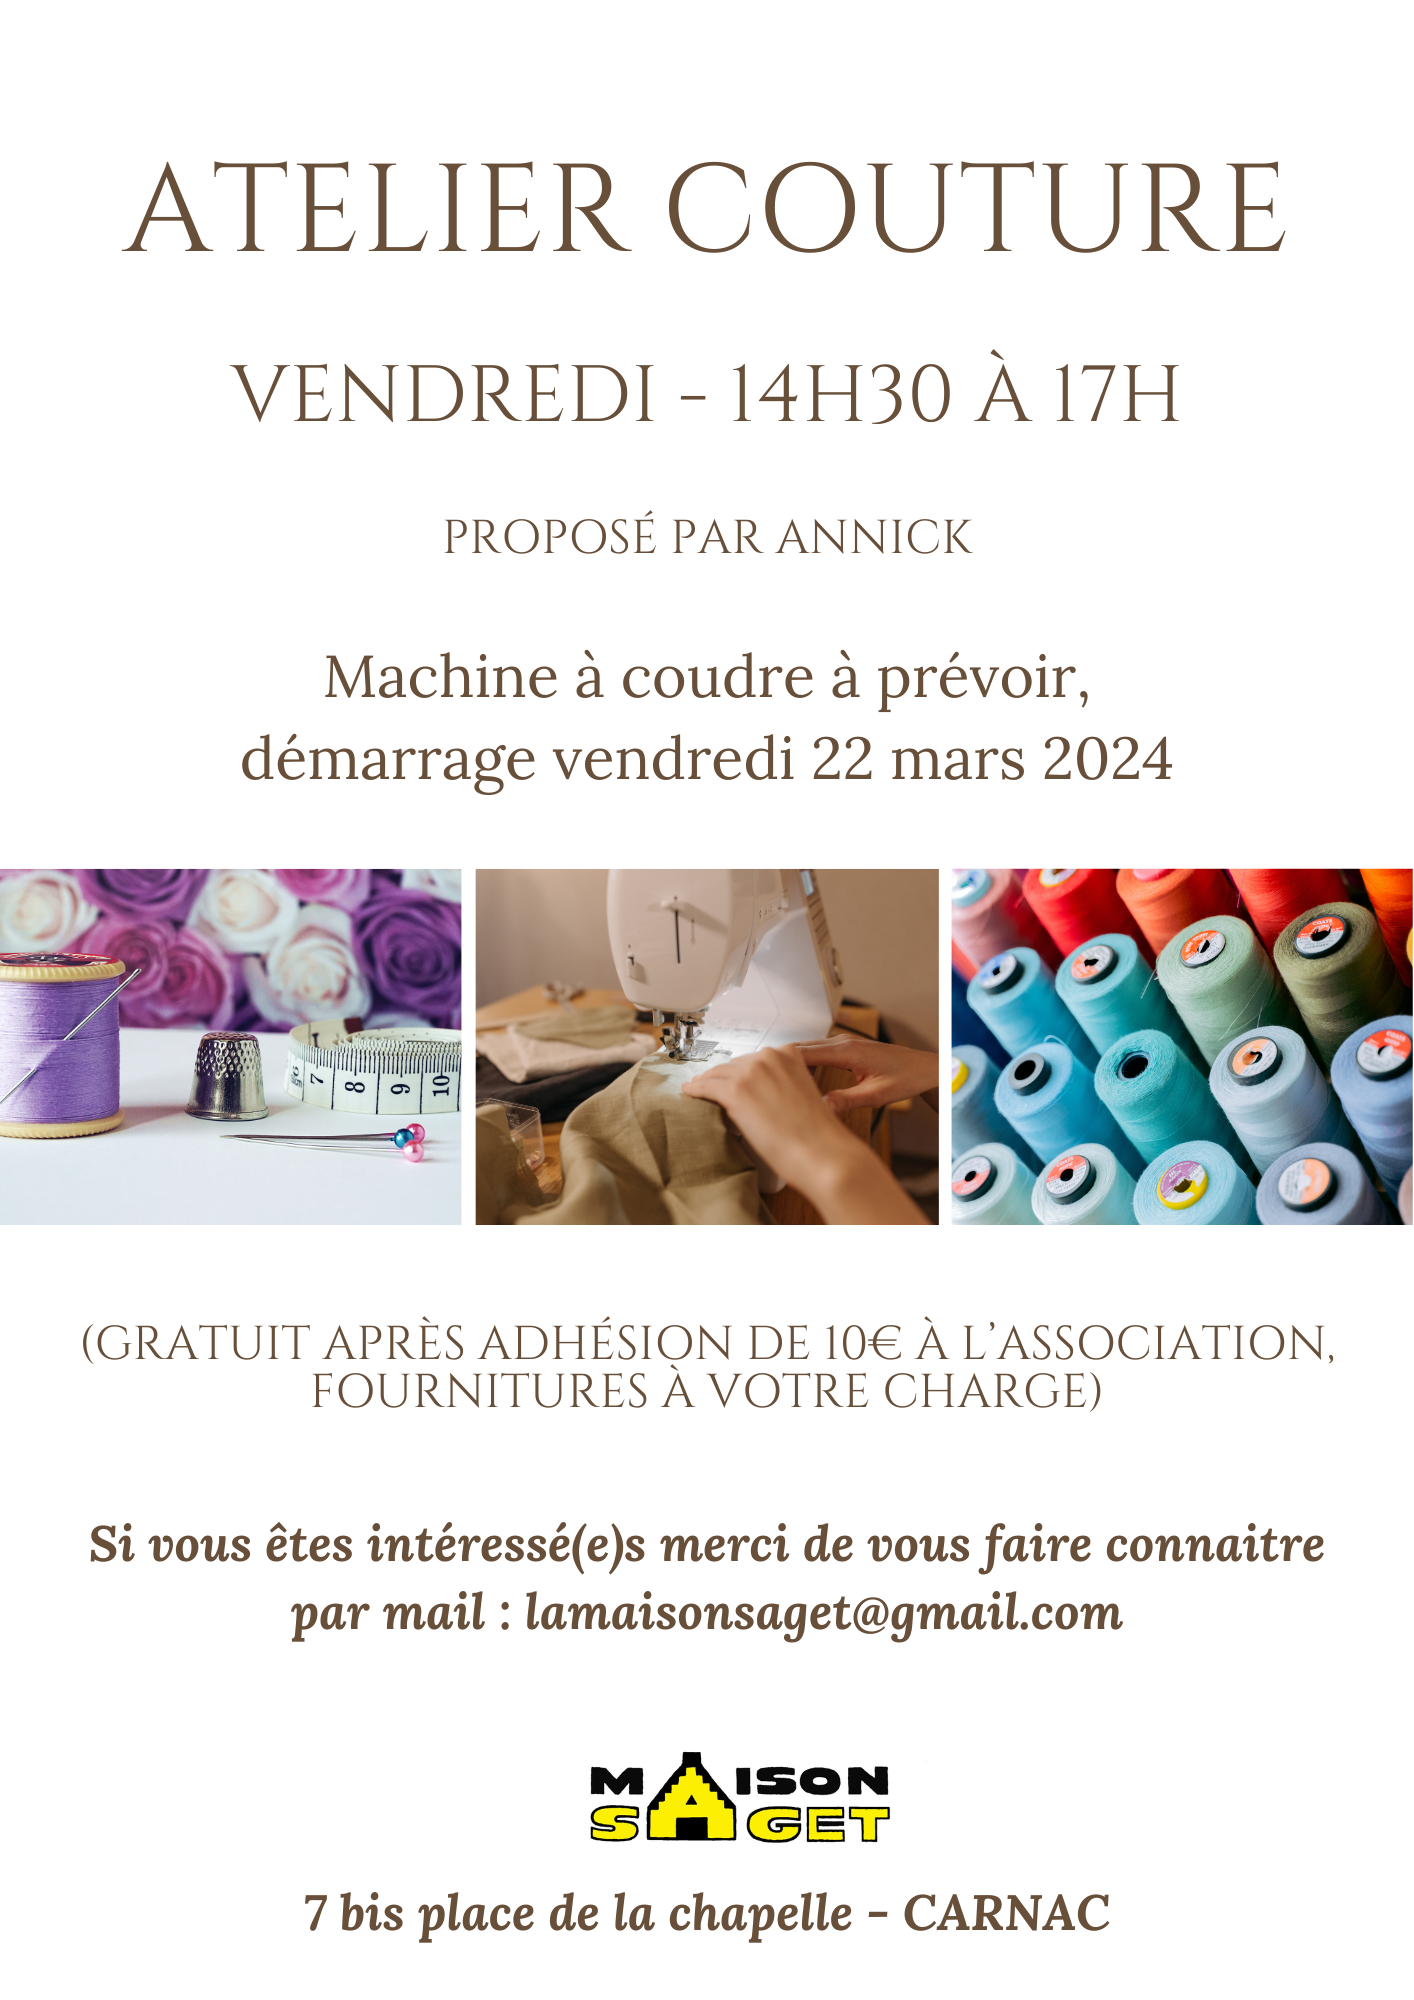 Ateliers couture 2024